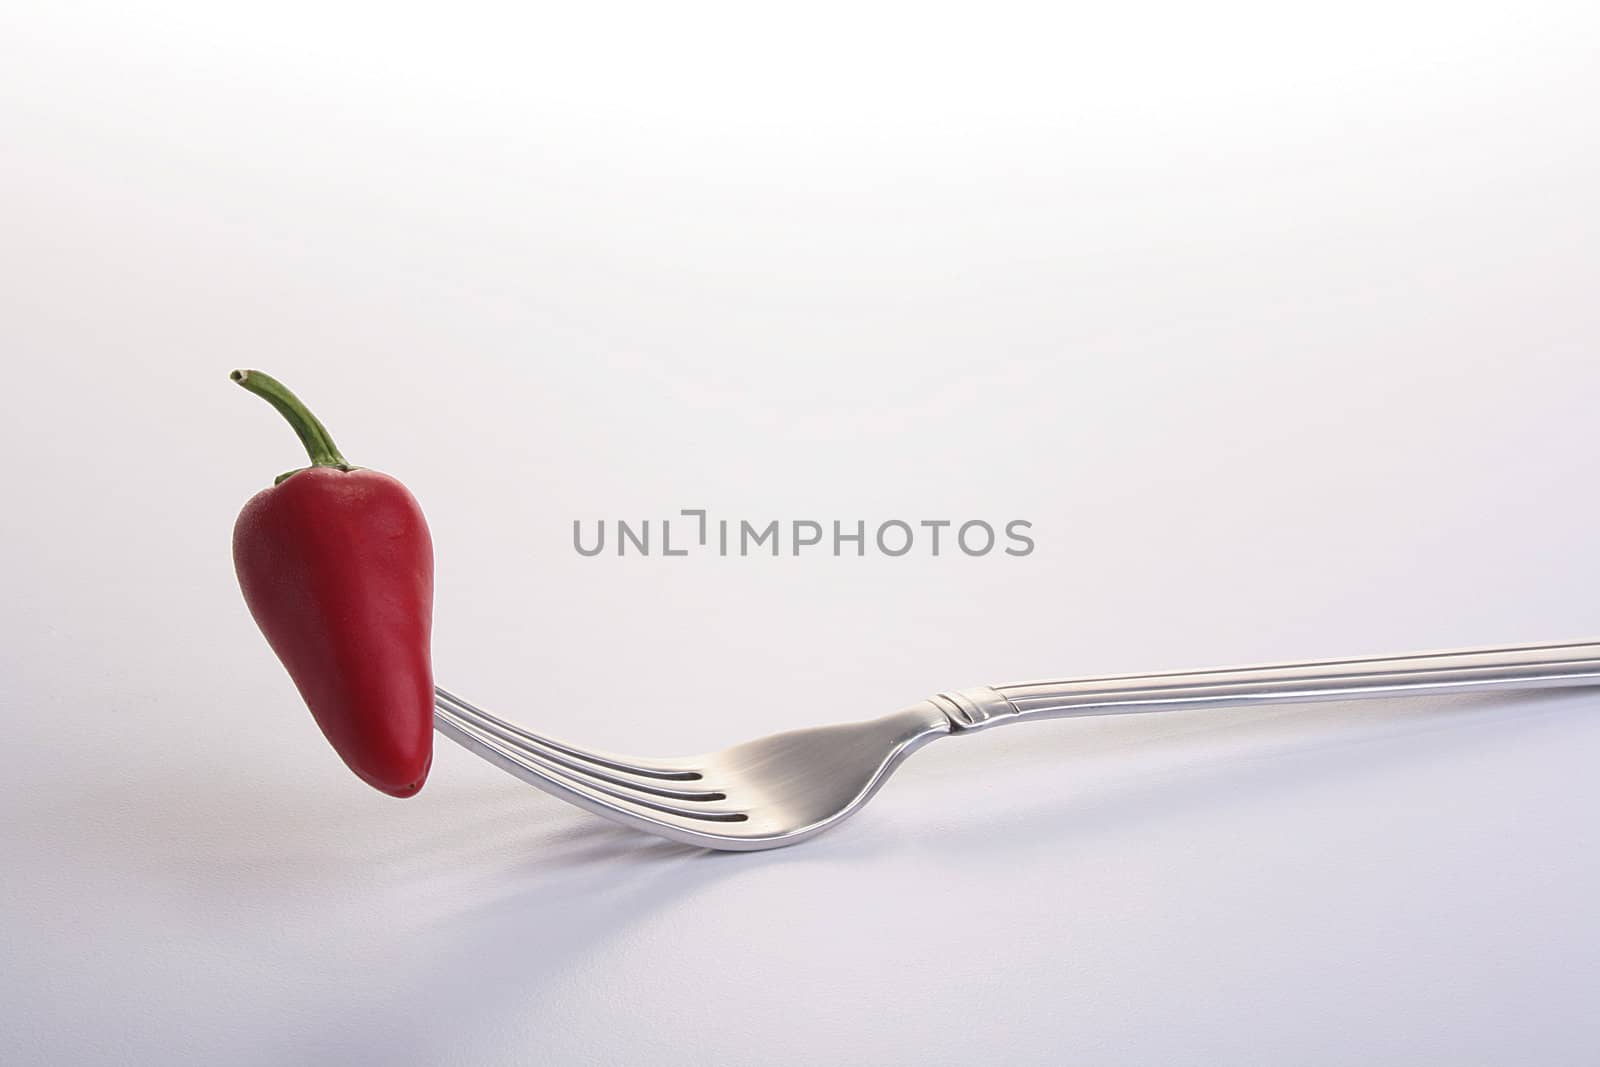 The red hot pepper is pinned on a fork.